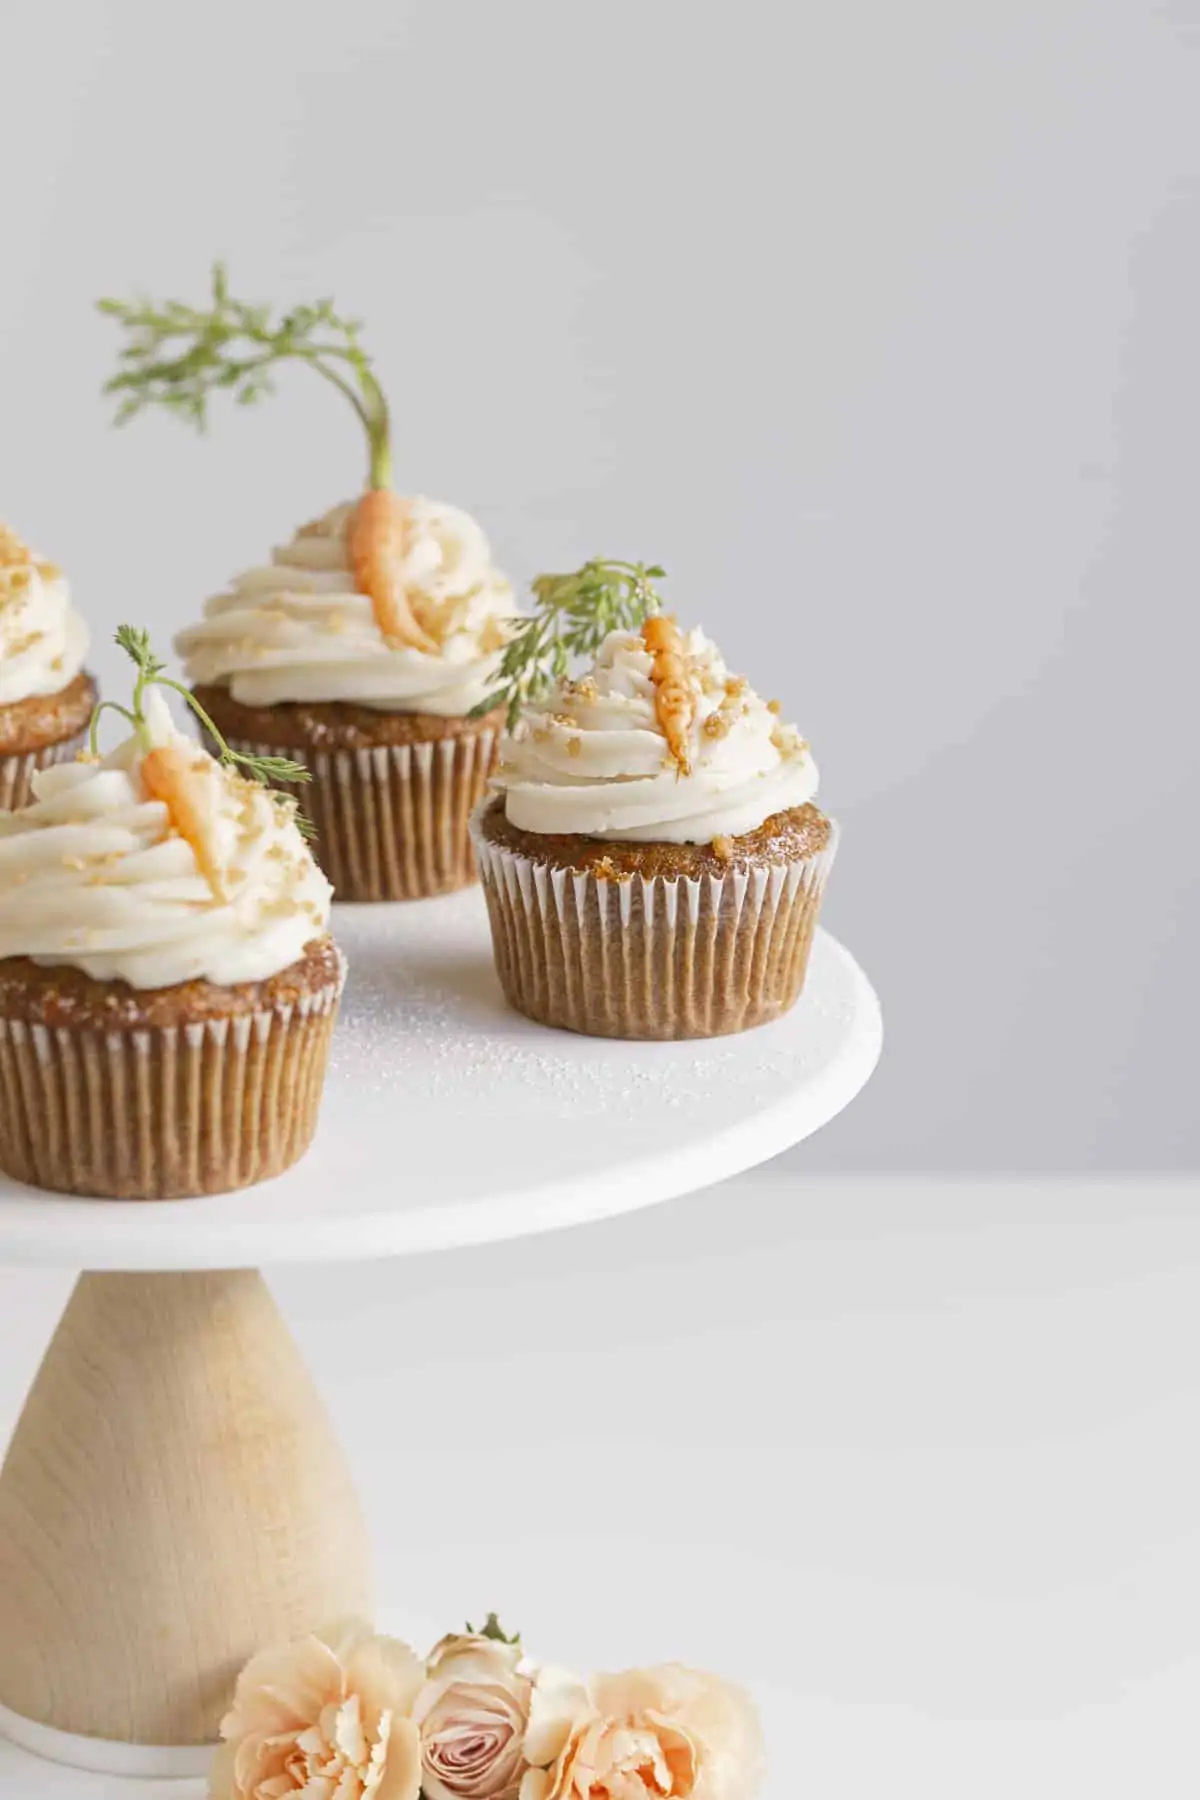 spiced carrot cupcakes on a cake stand with mini carrots and flowers